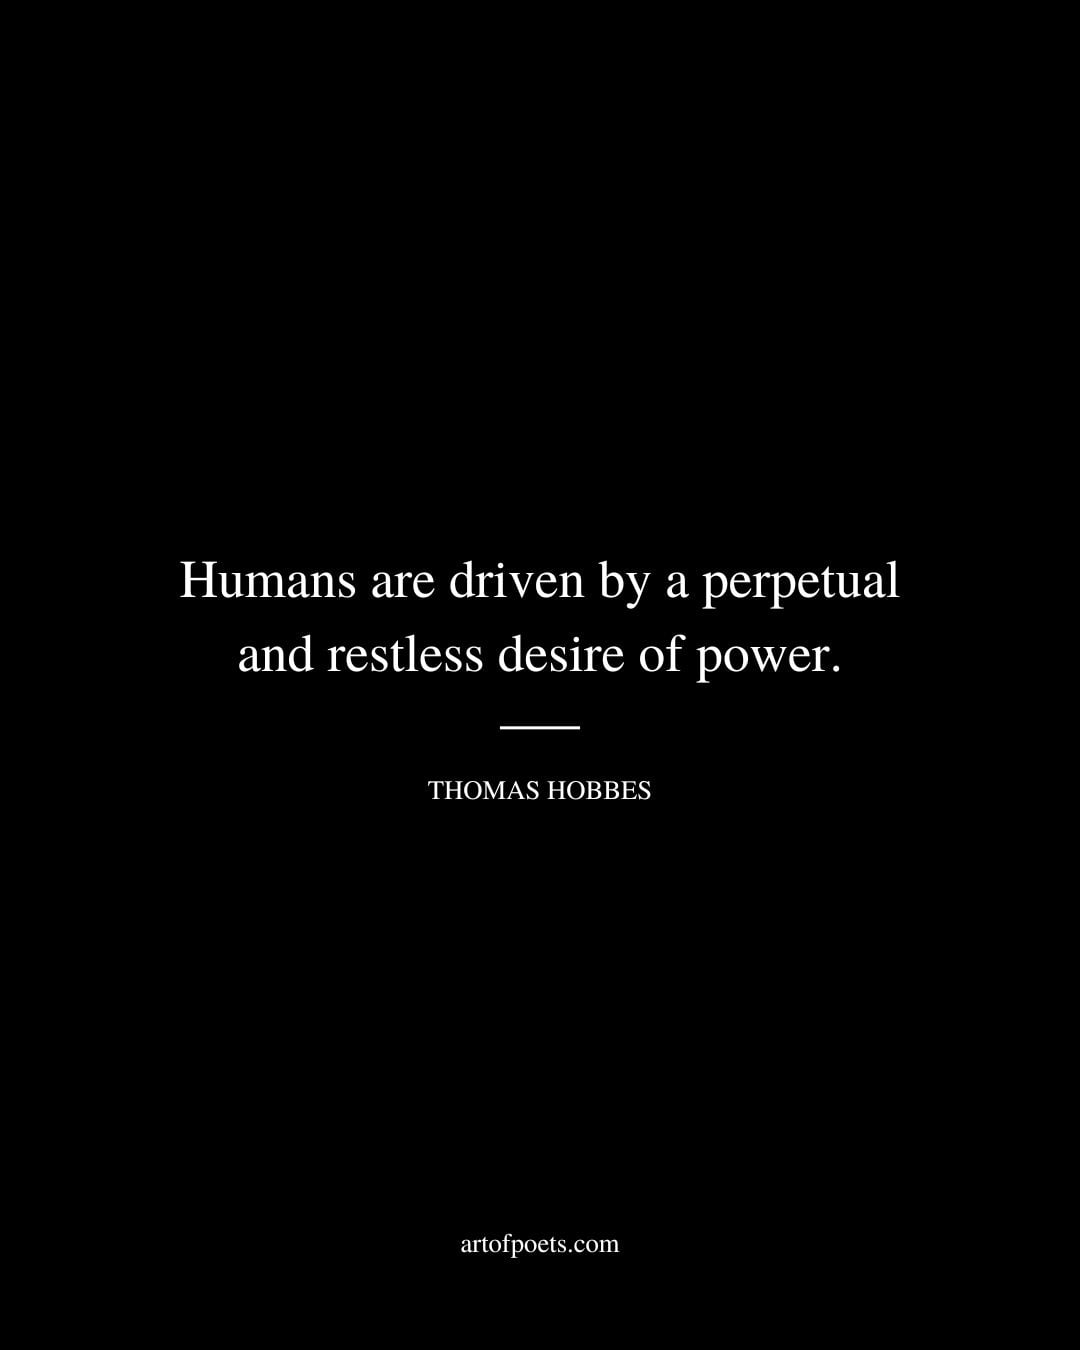 Humans are driven by a perpetual and restless desire of power